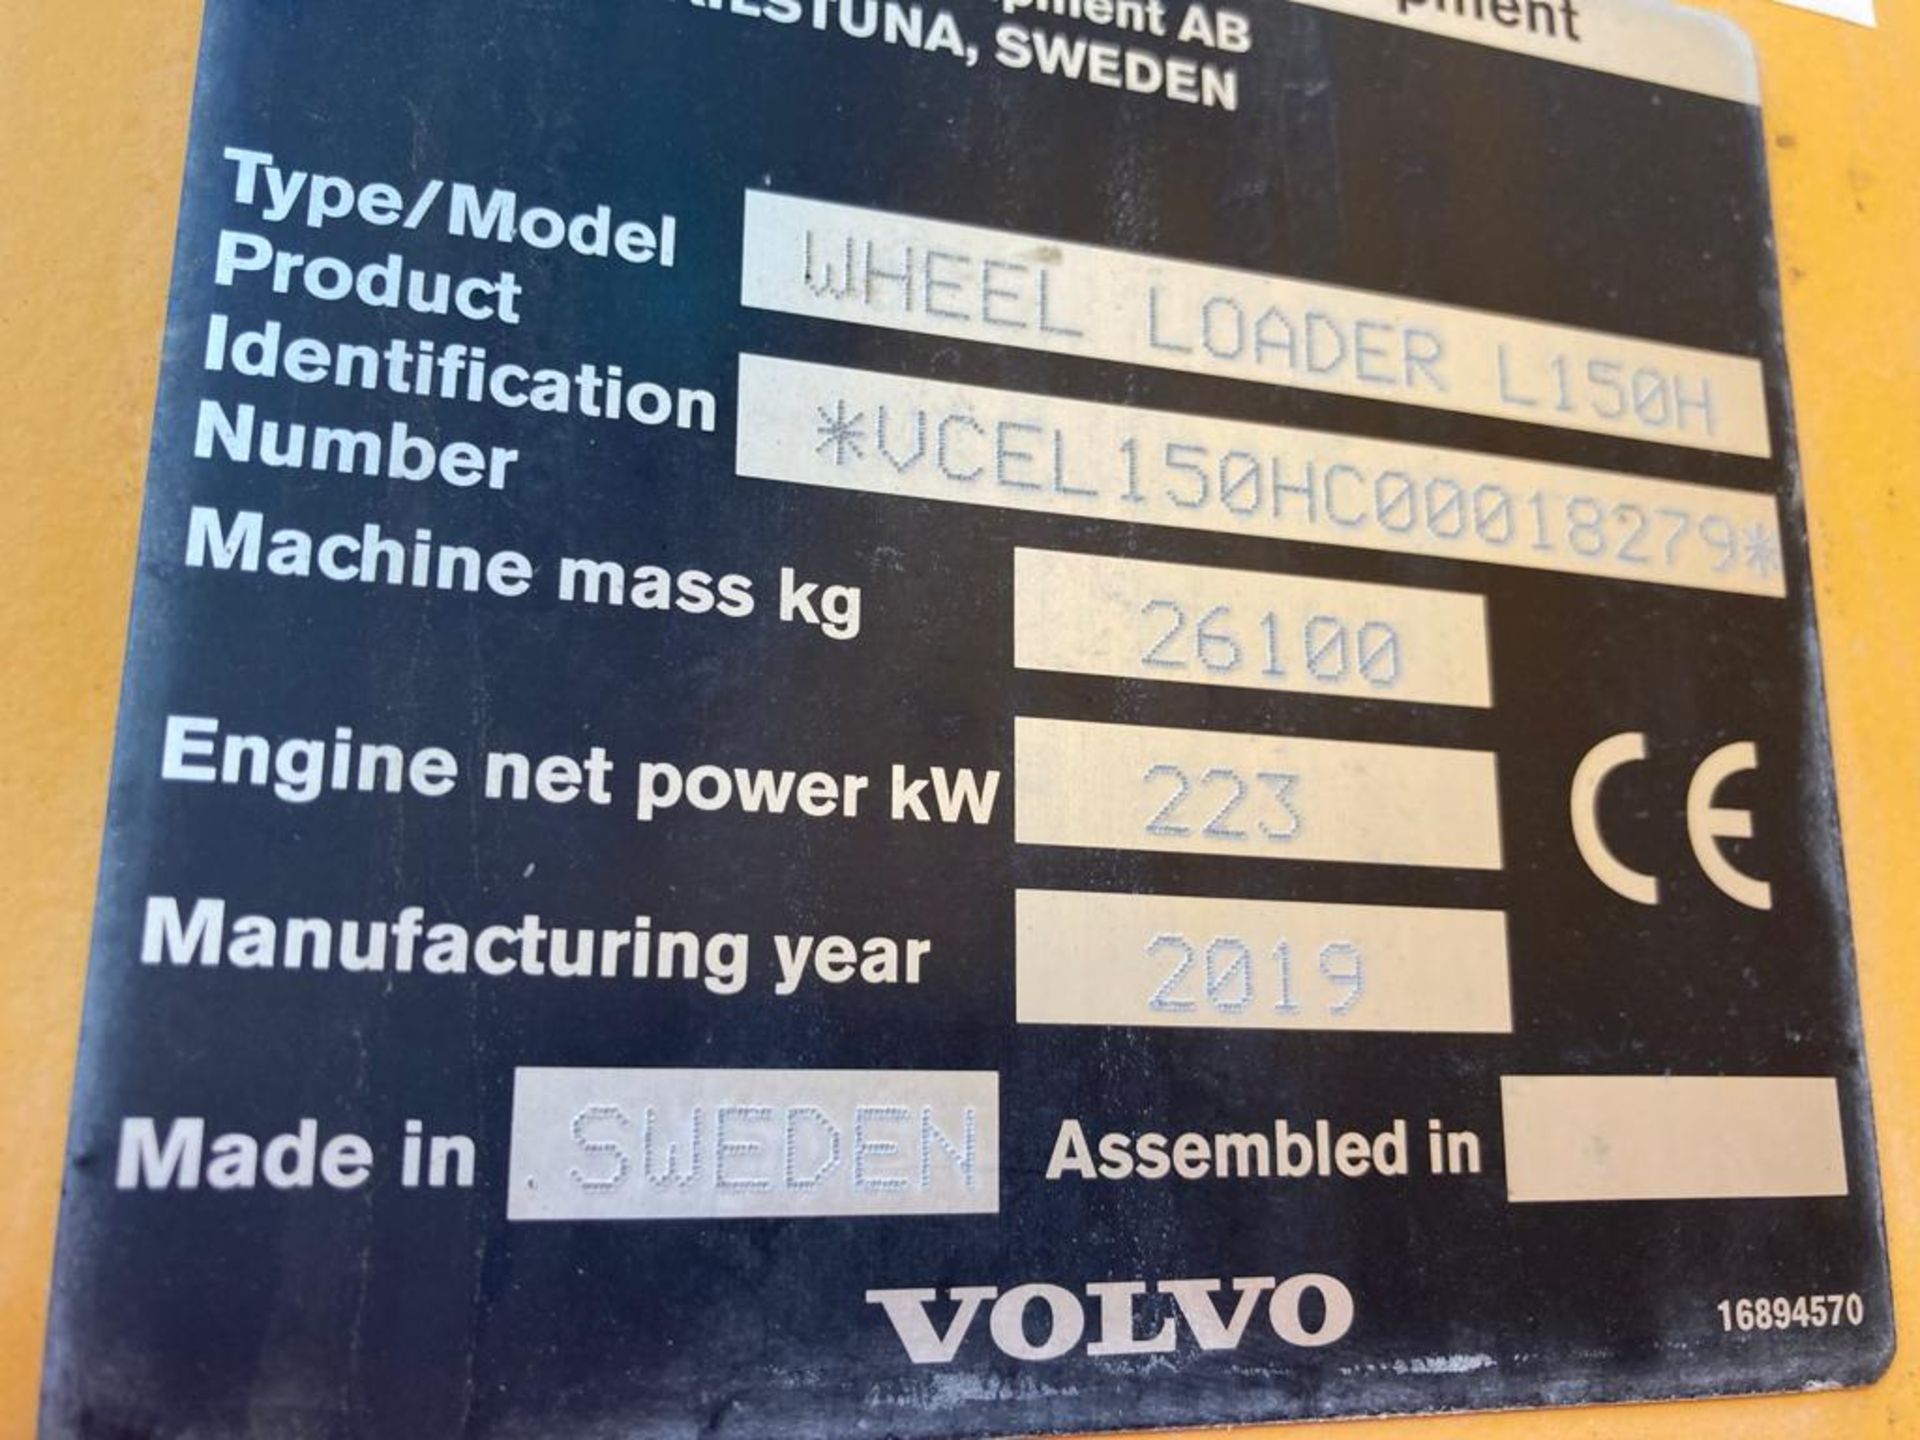 Direct from Volvo Main Dealer, 2019 (L150H#18279A) - Image 16 of 23